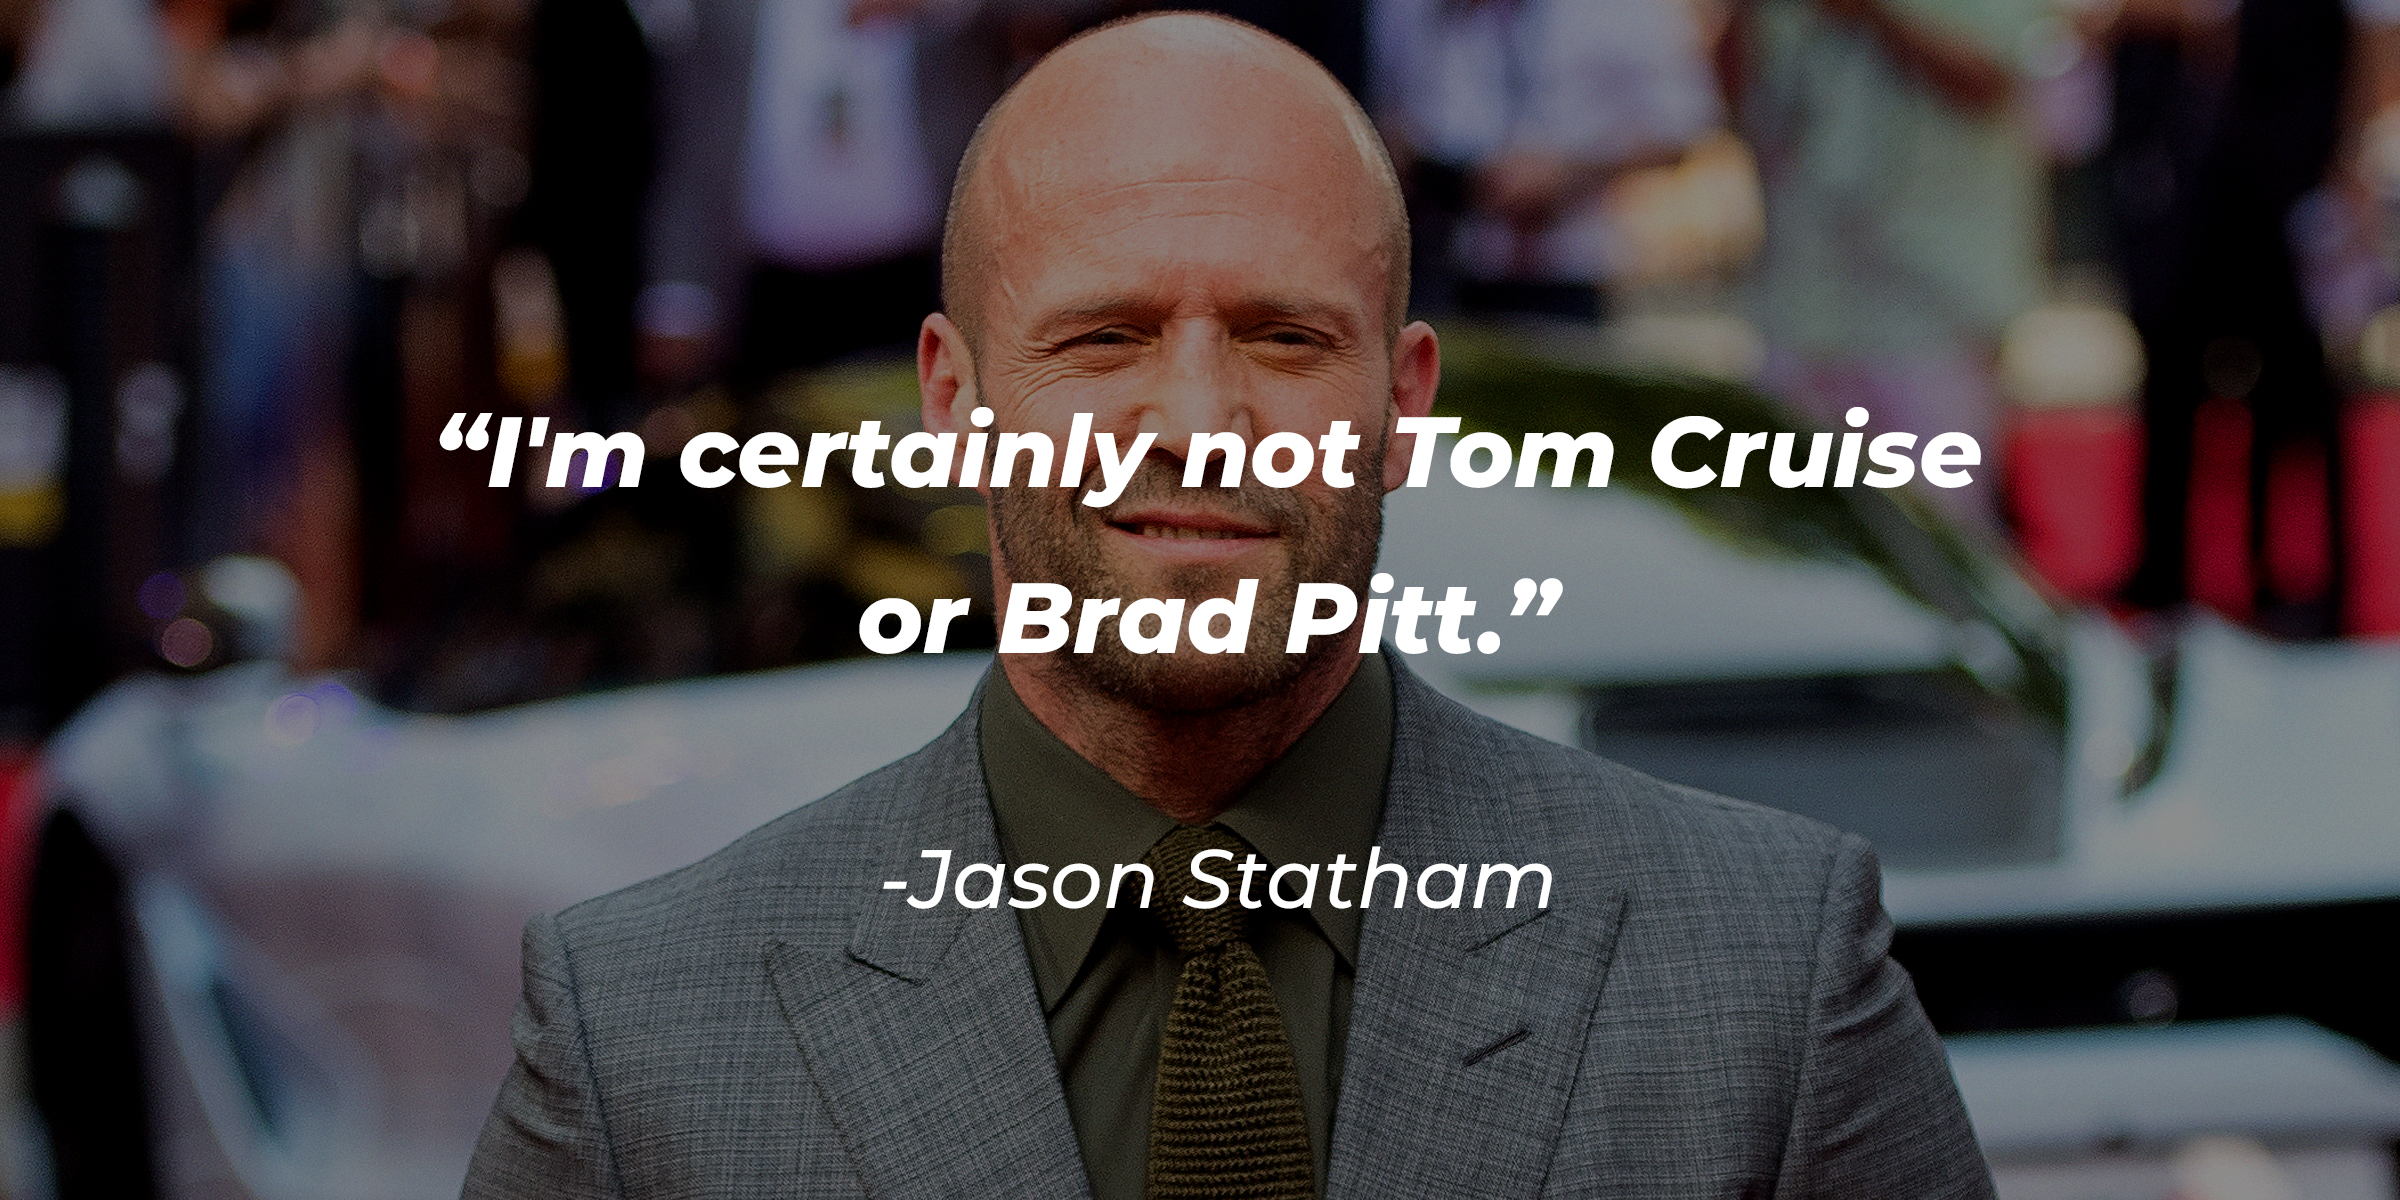 A photo of Jason Statham with Jason Statham's quote: “I'm certainly not Tom Cruise or Brad Pitt.” | Source: Getty Images